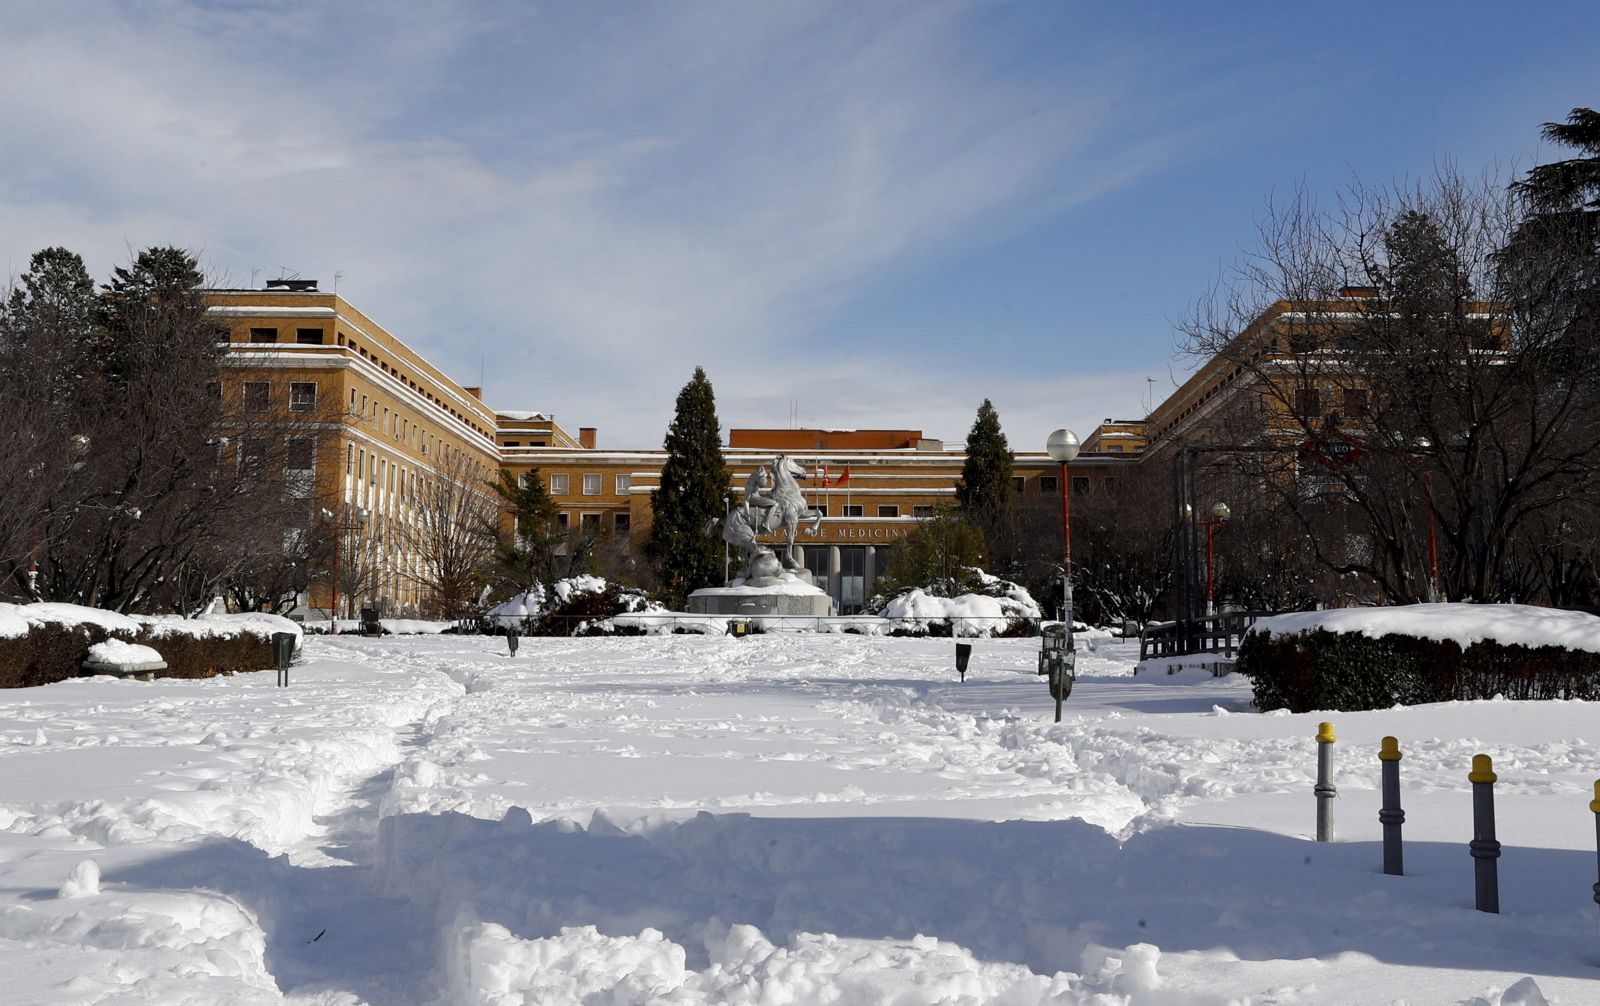 epa08930987 A general view of the Medicine Campus at Complutense University in Madrid, Spain, 11 January 2021. Schools and universities have been closed and bus services were suspended due after Storm Filomena hit the region.  EPA/BALLESTEROS